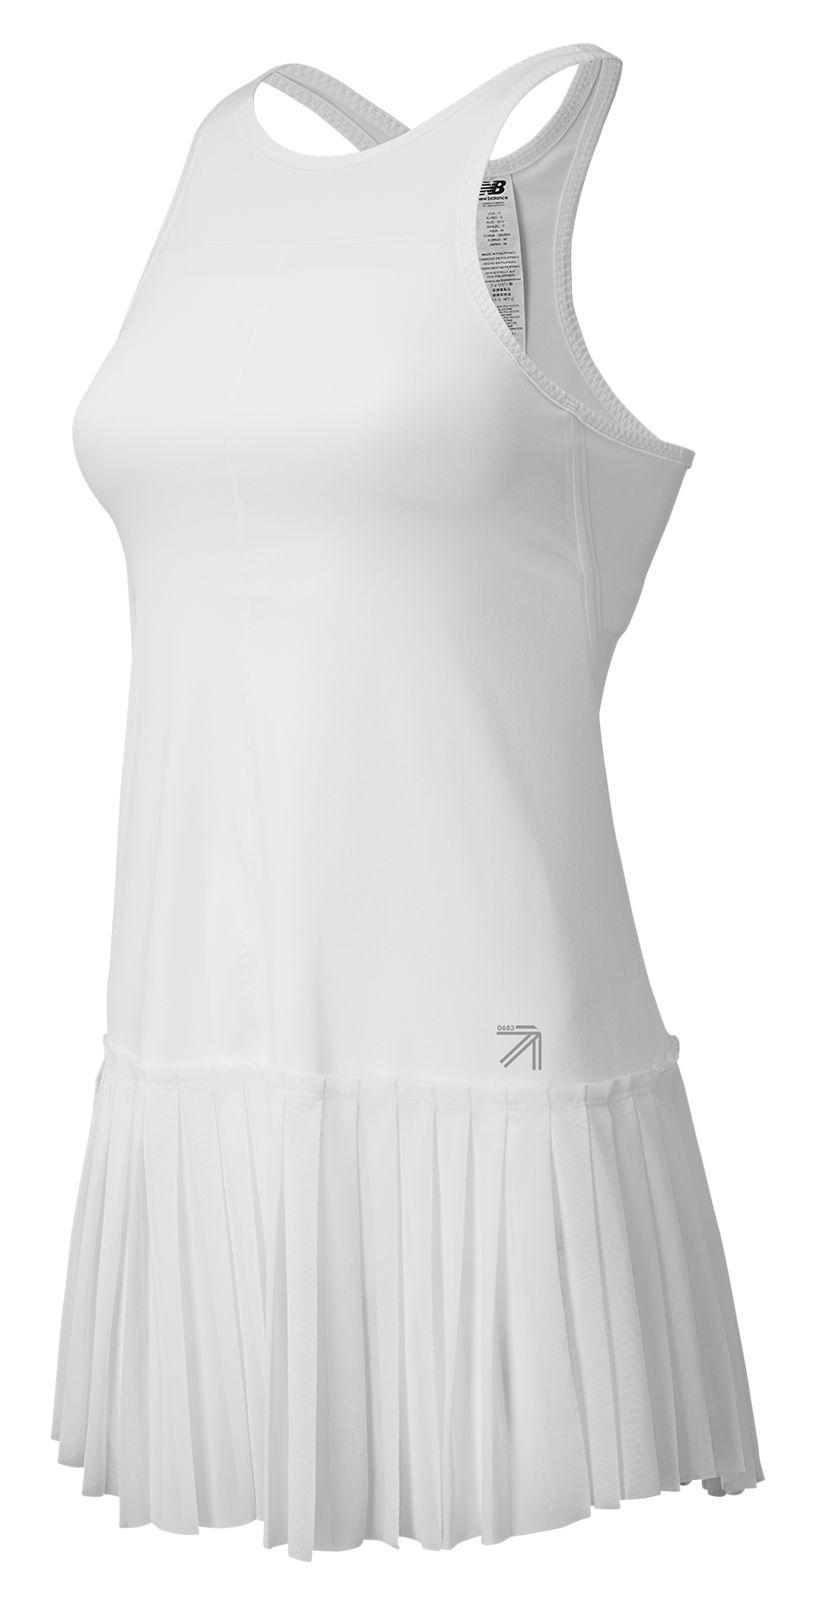 new balance tennis outfits